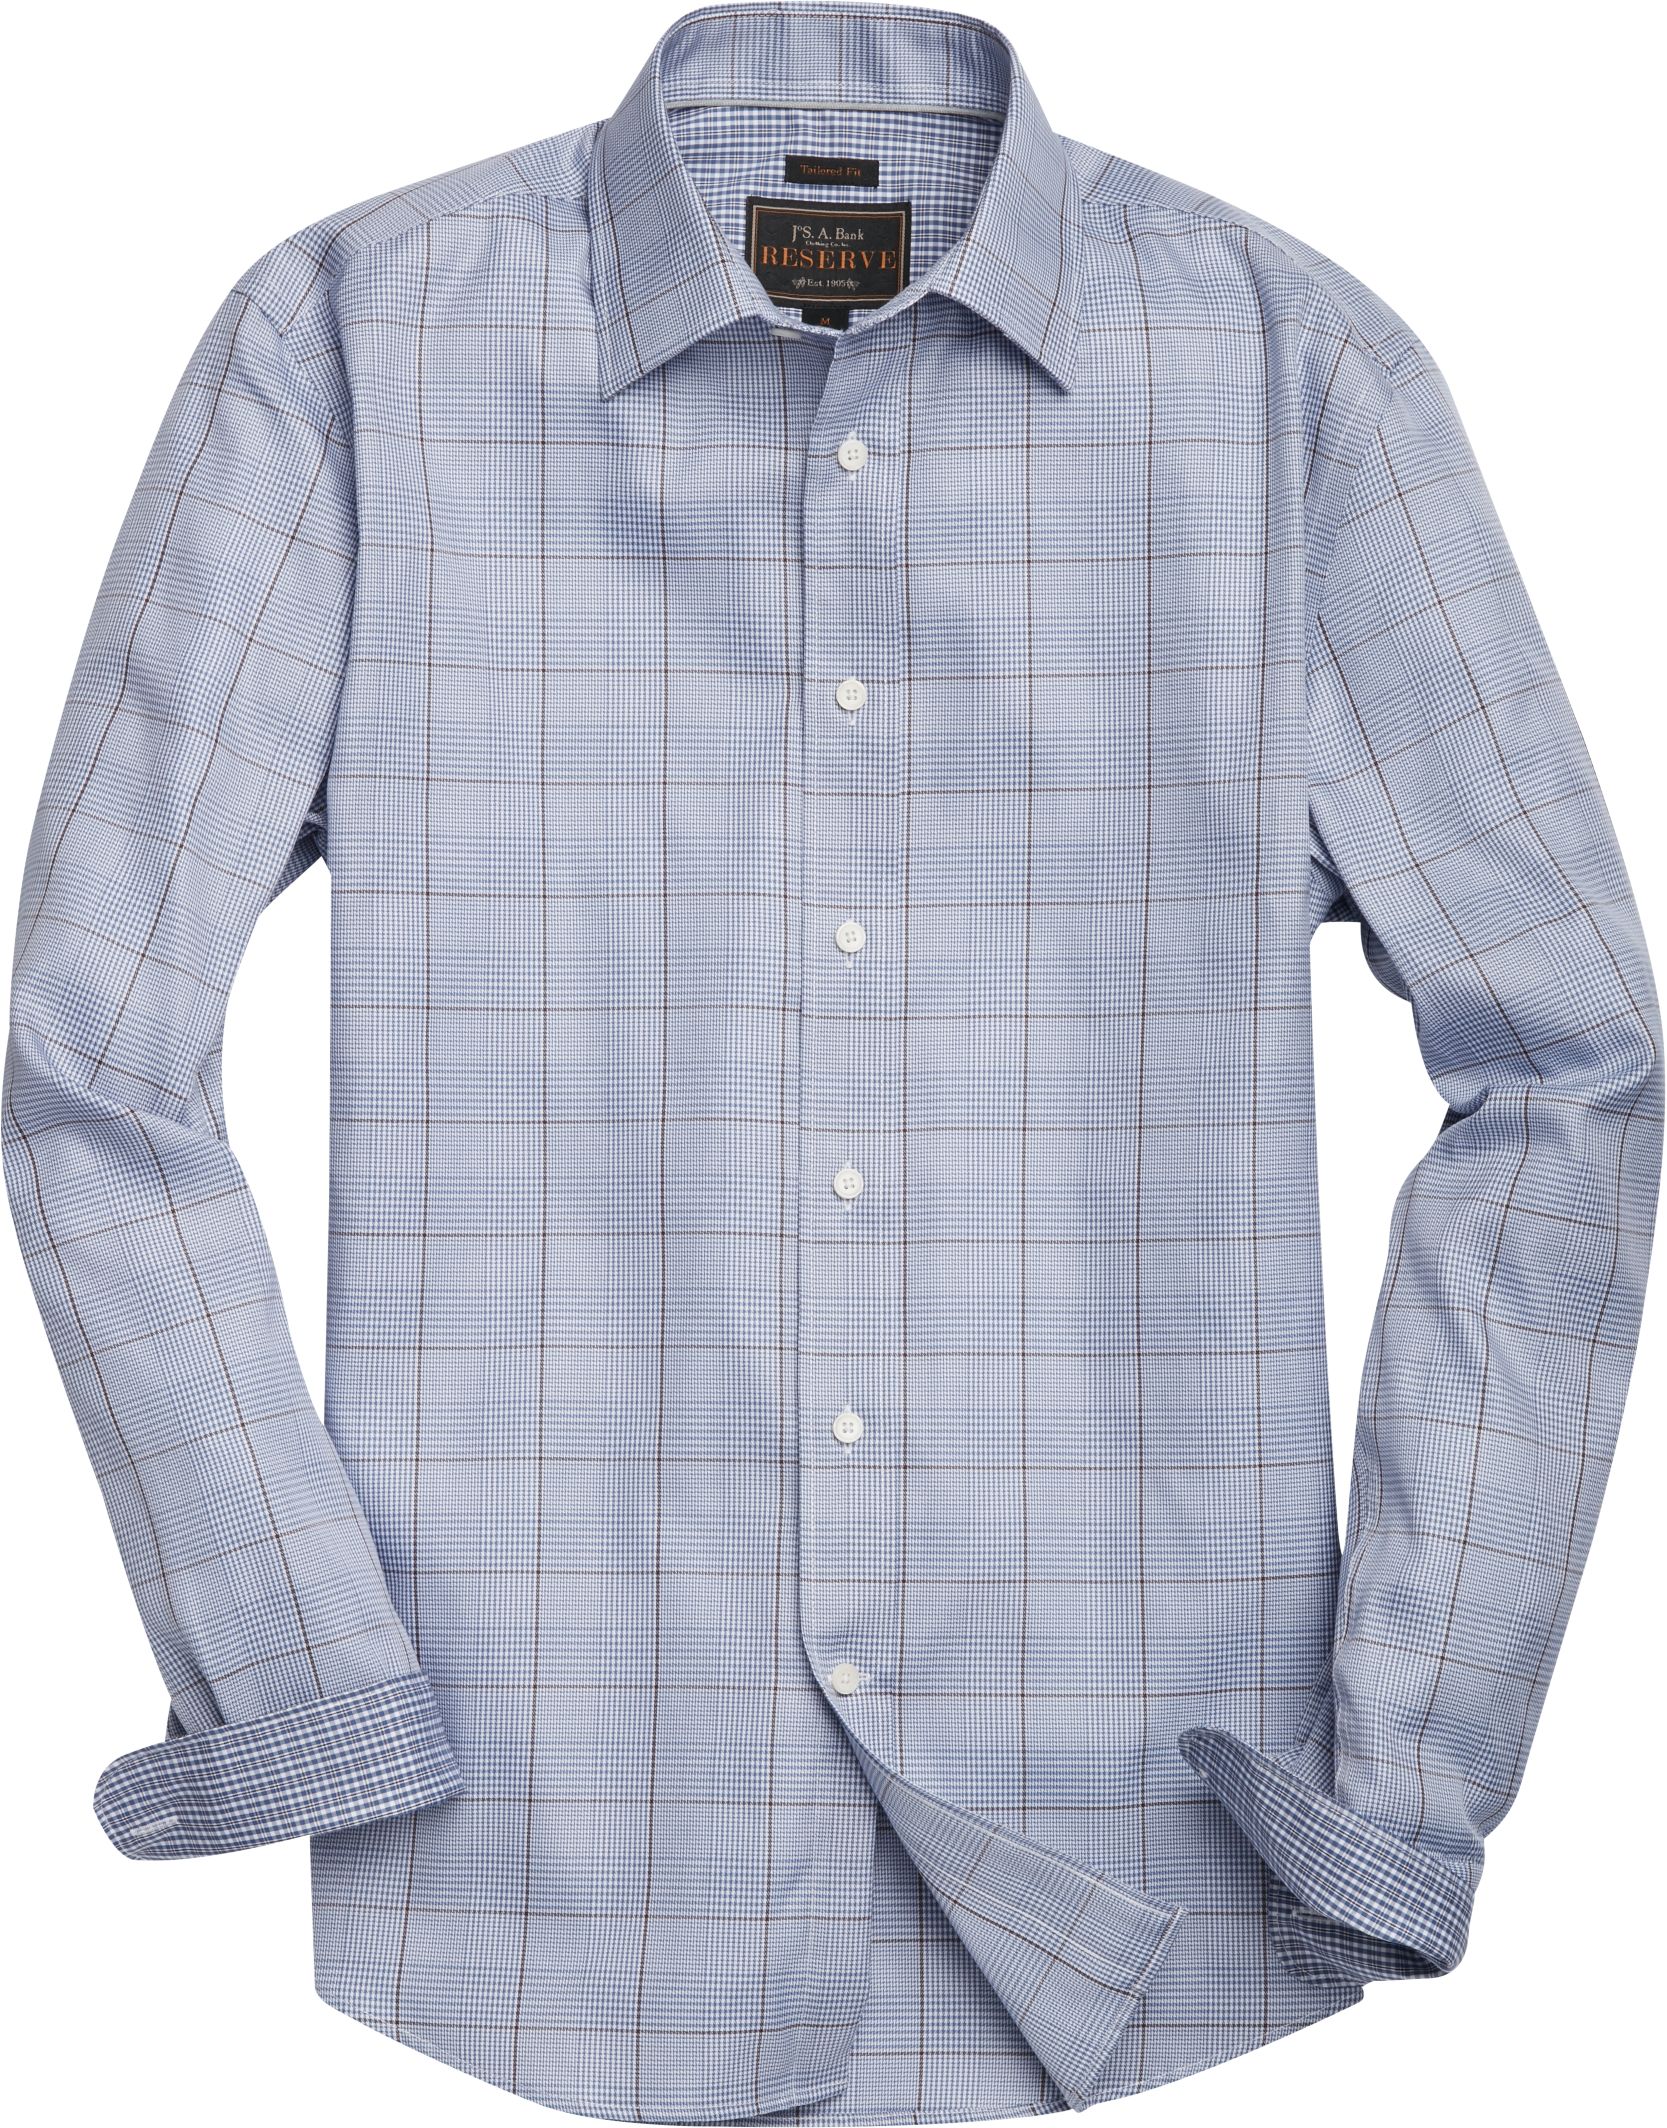 Reserve Collection Tailored Fit Spread Collar Plaid Sportshirt - Big ...